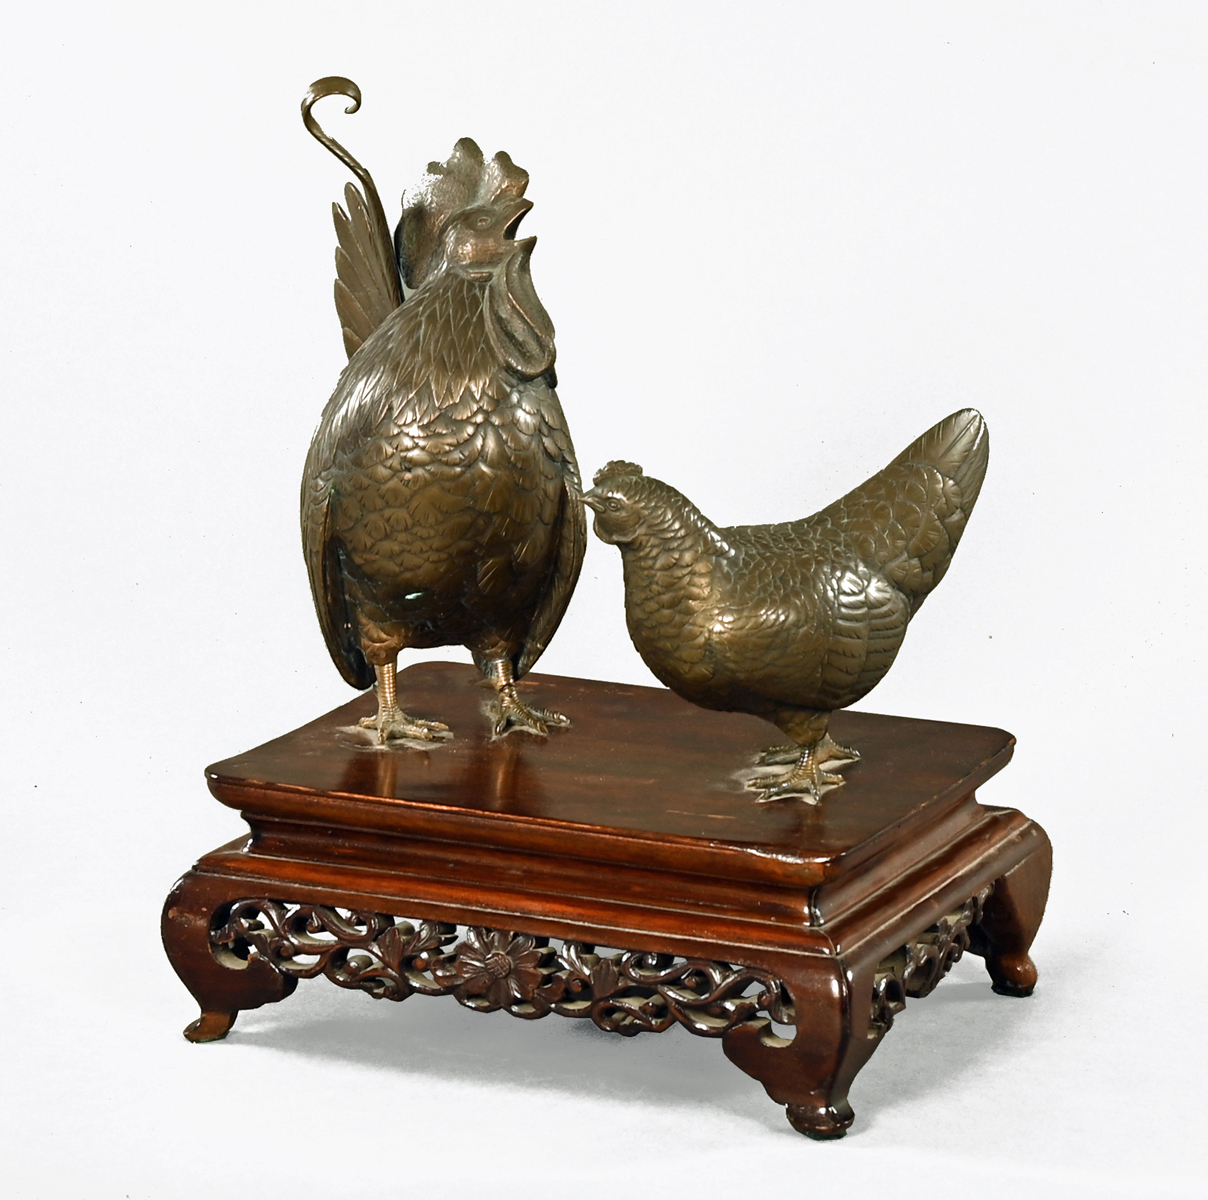 A Japanese bronze cockerel and hen, raised on a wooden base.